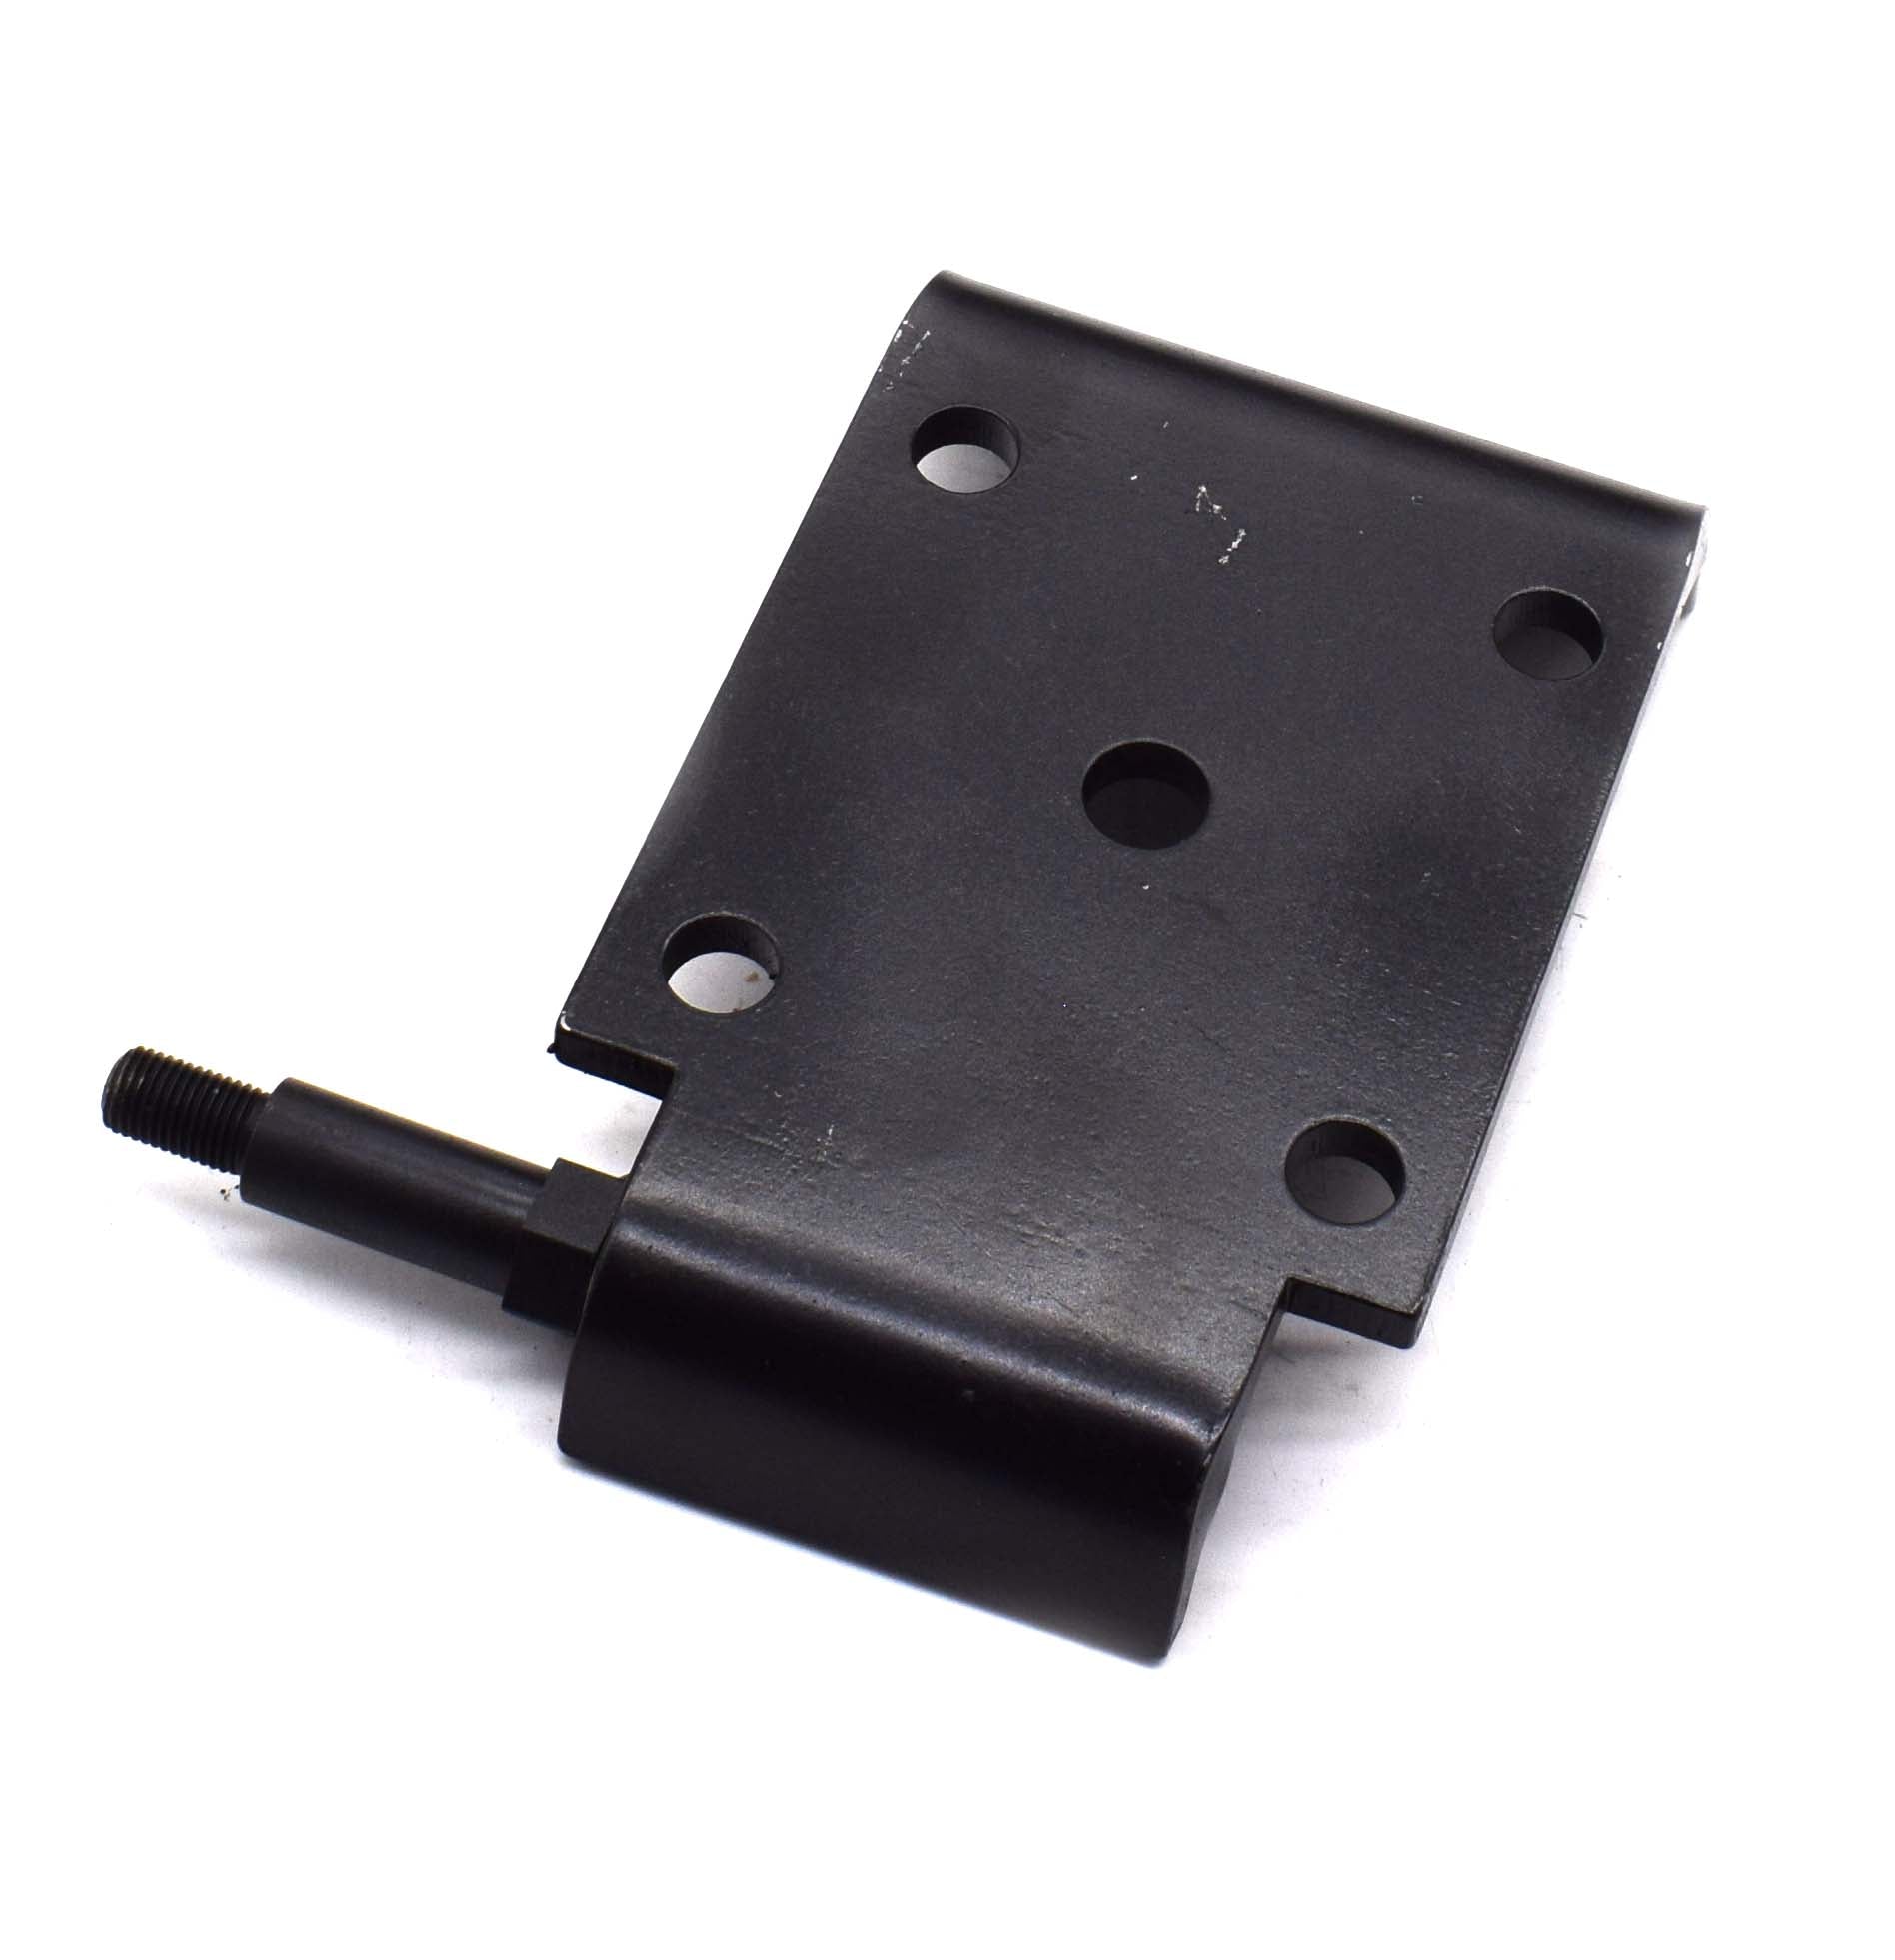 Leaf Spring Shock Mount Plate, Rear Passenger Side, 1967-1973, Jeepster Commando and Jeep Commando - The JeepsterMan